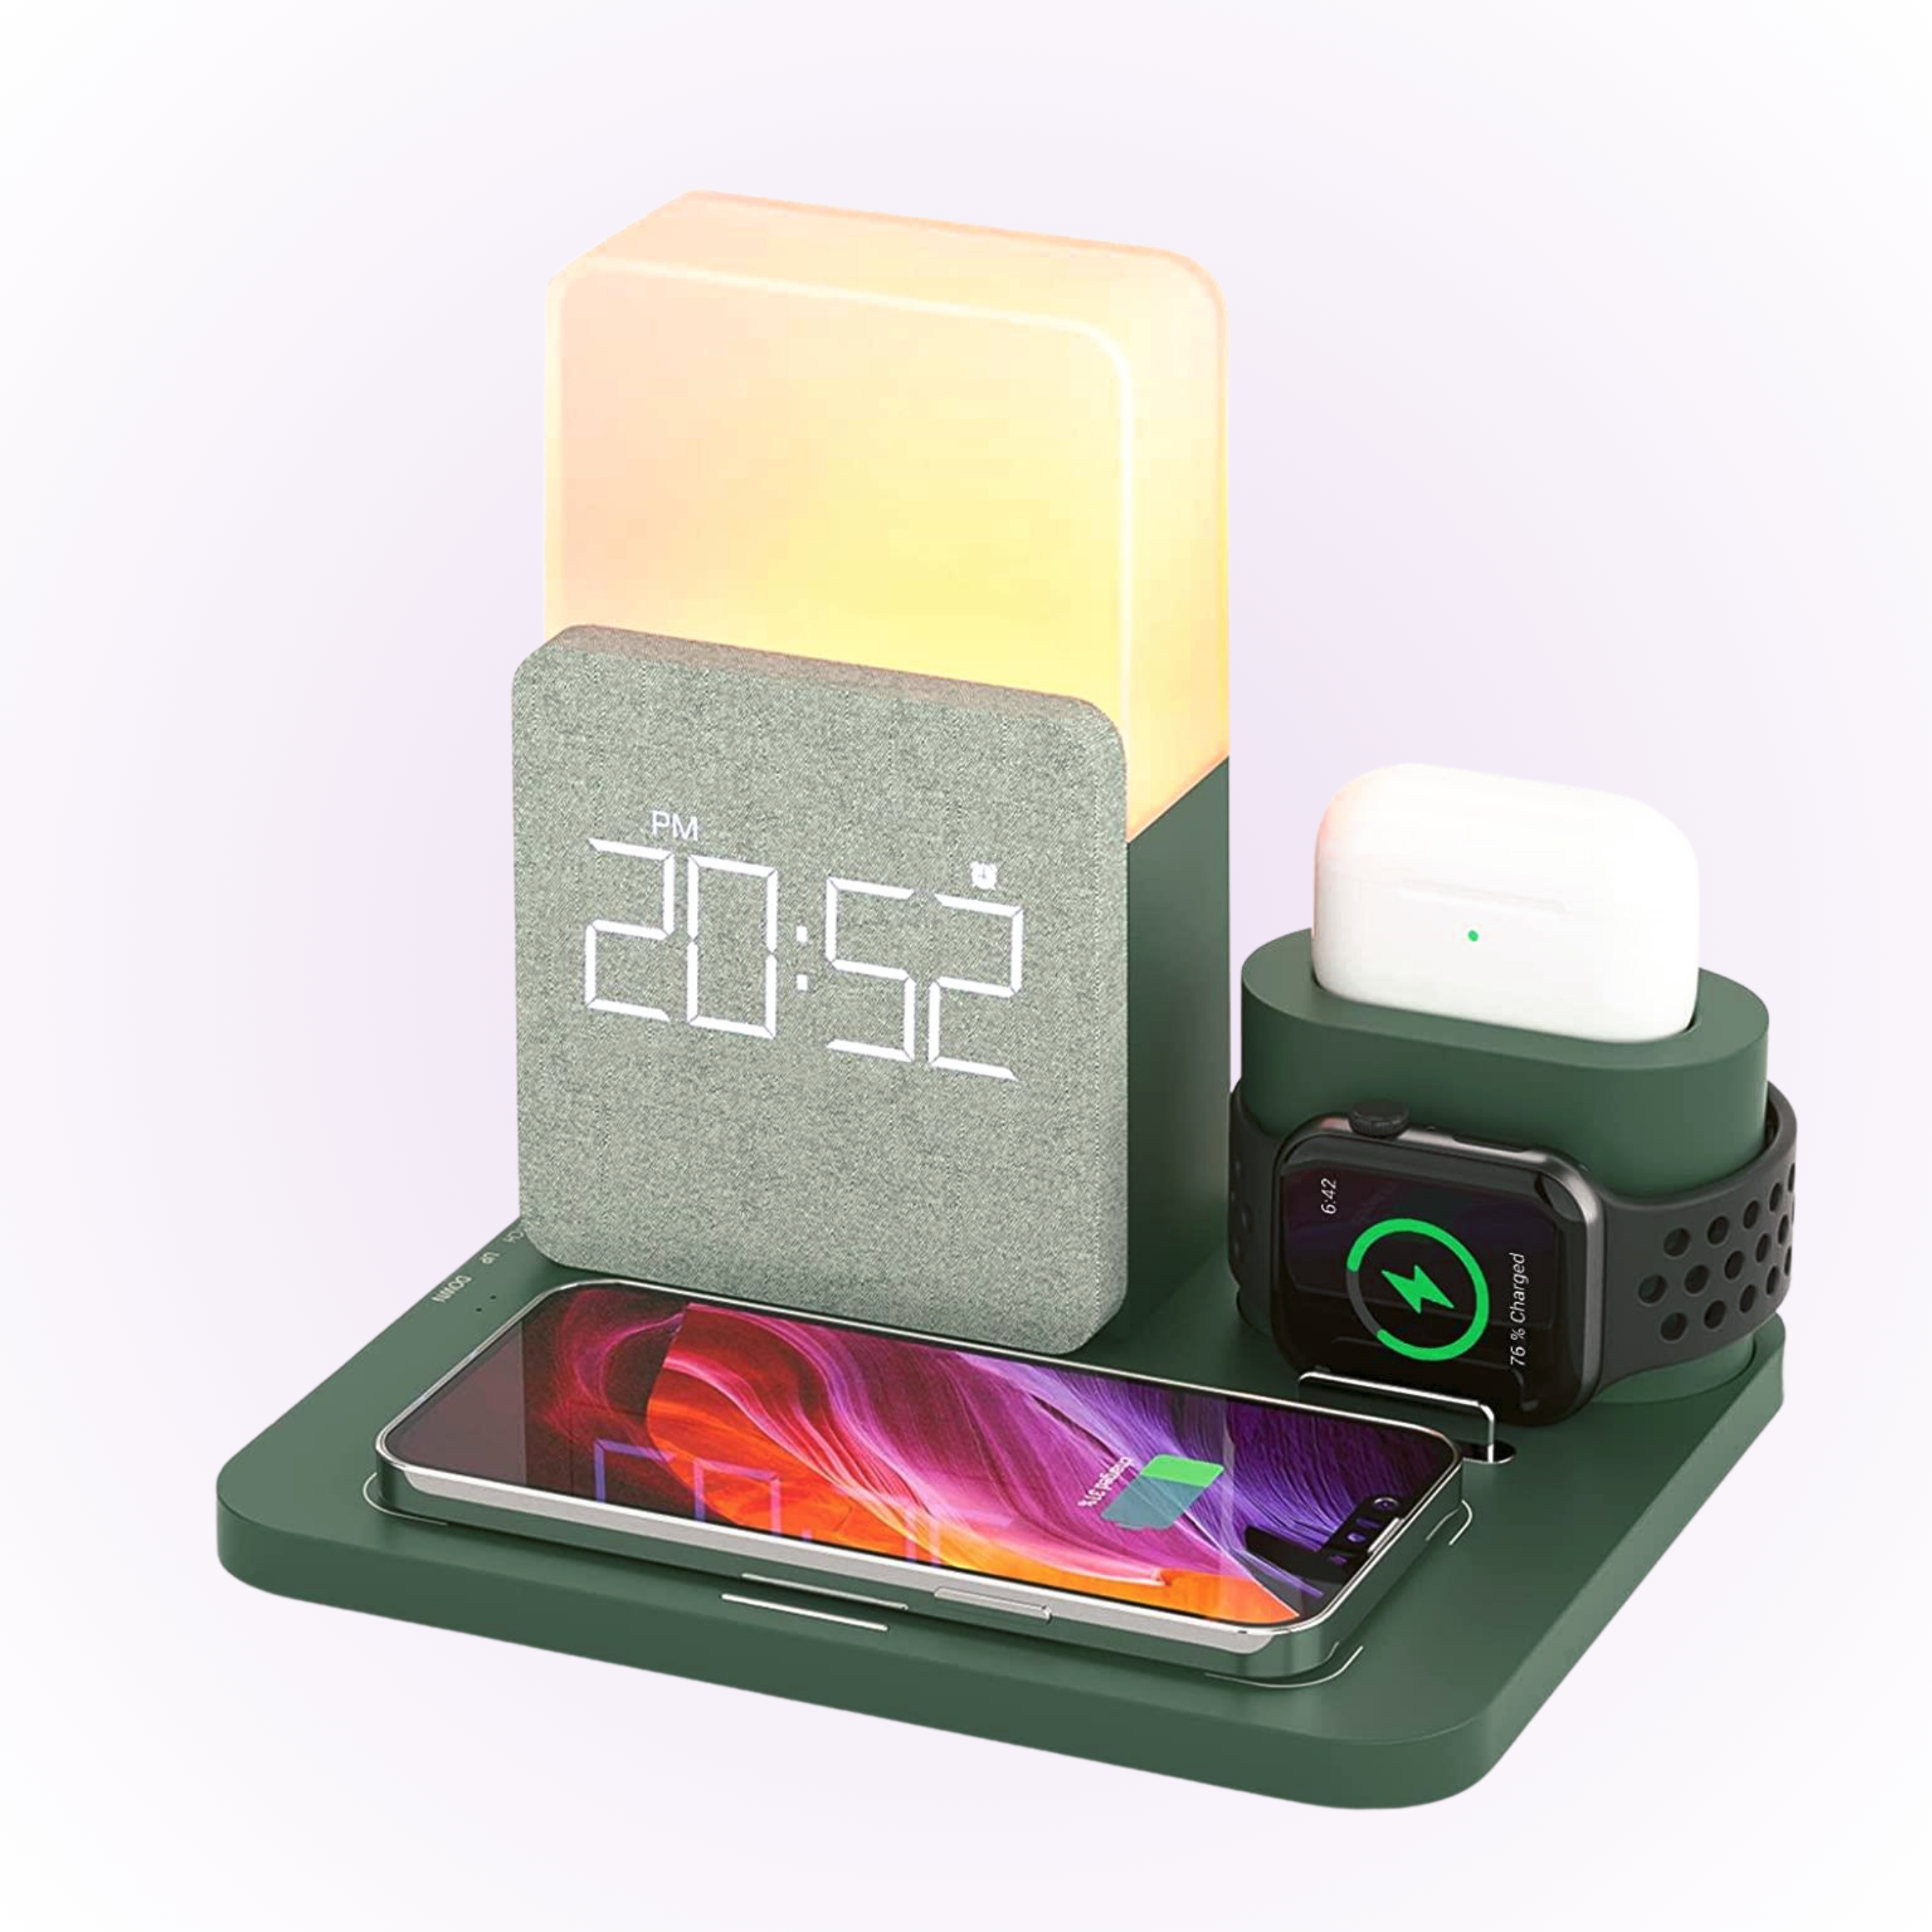 khaki green alarm clock with wireless charging iphone, airpods and apple watch